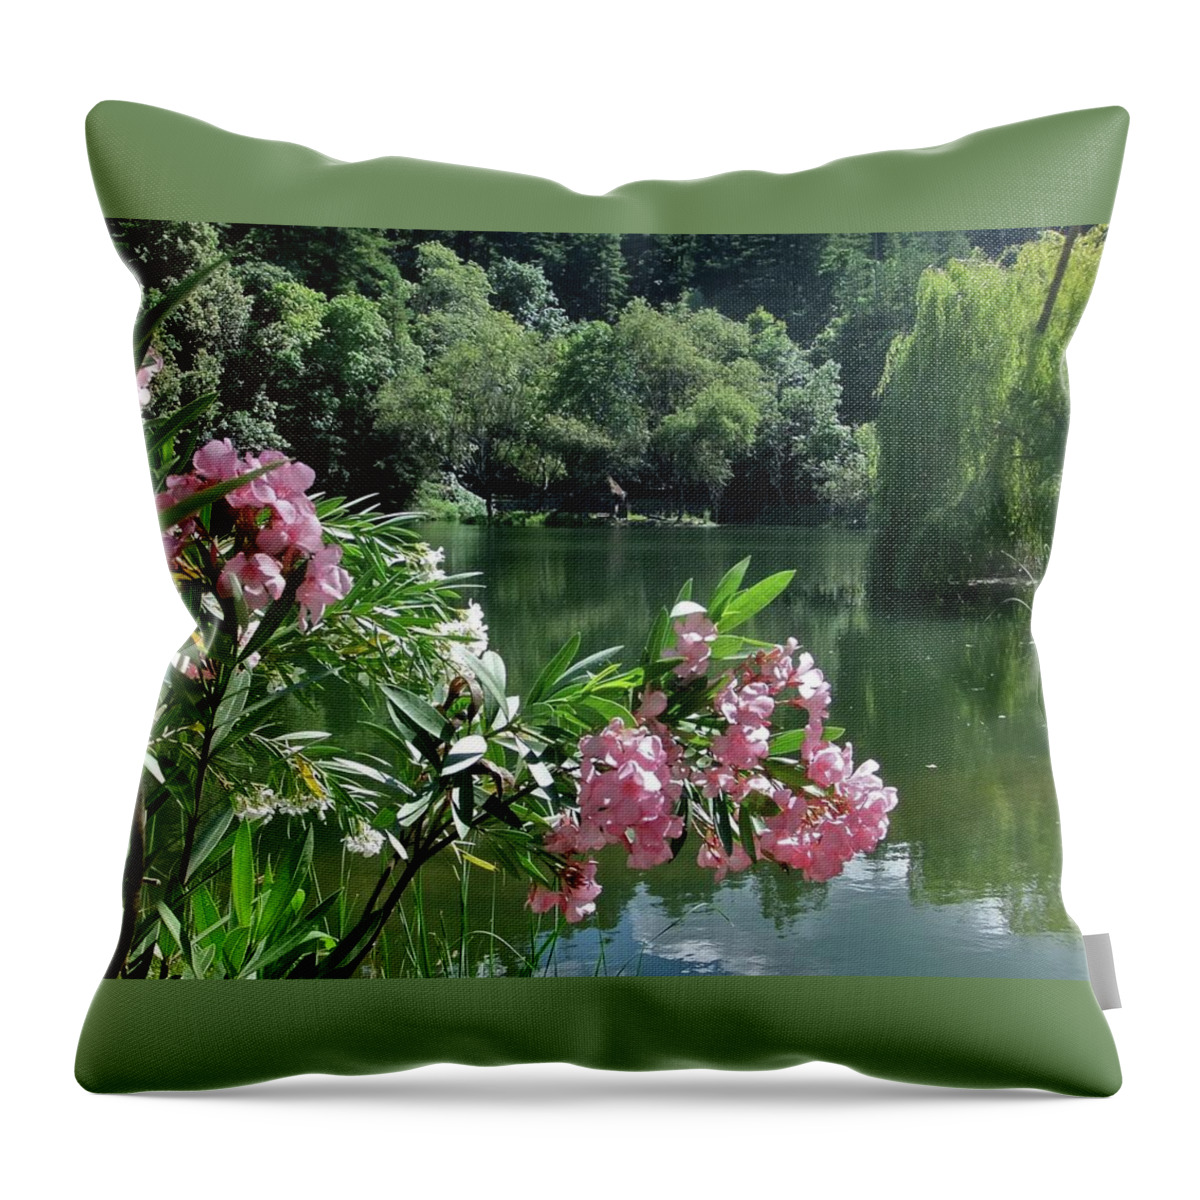 Flowers Throw Pillow featuring the photograph Weeping Willow Pond by Kathy Chism